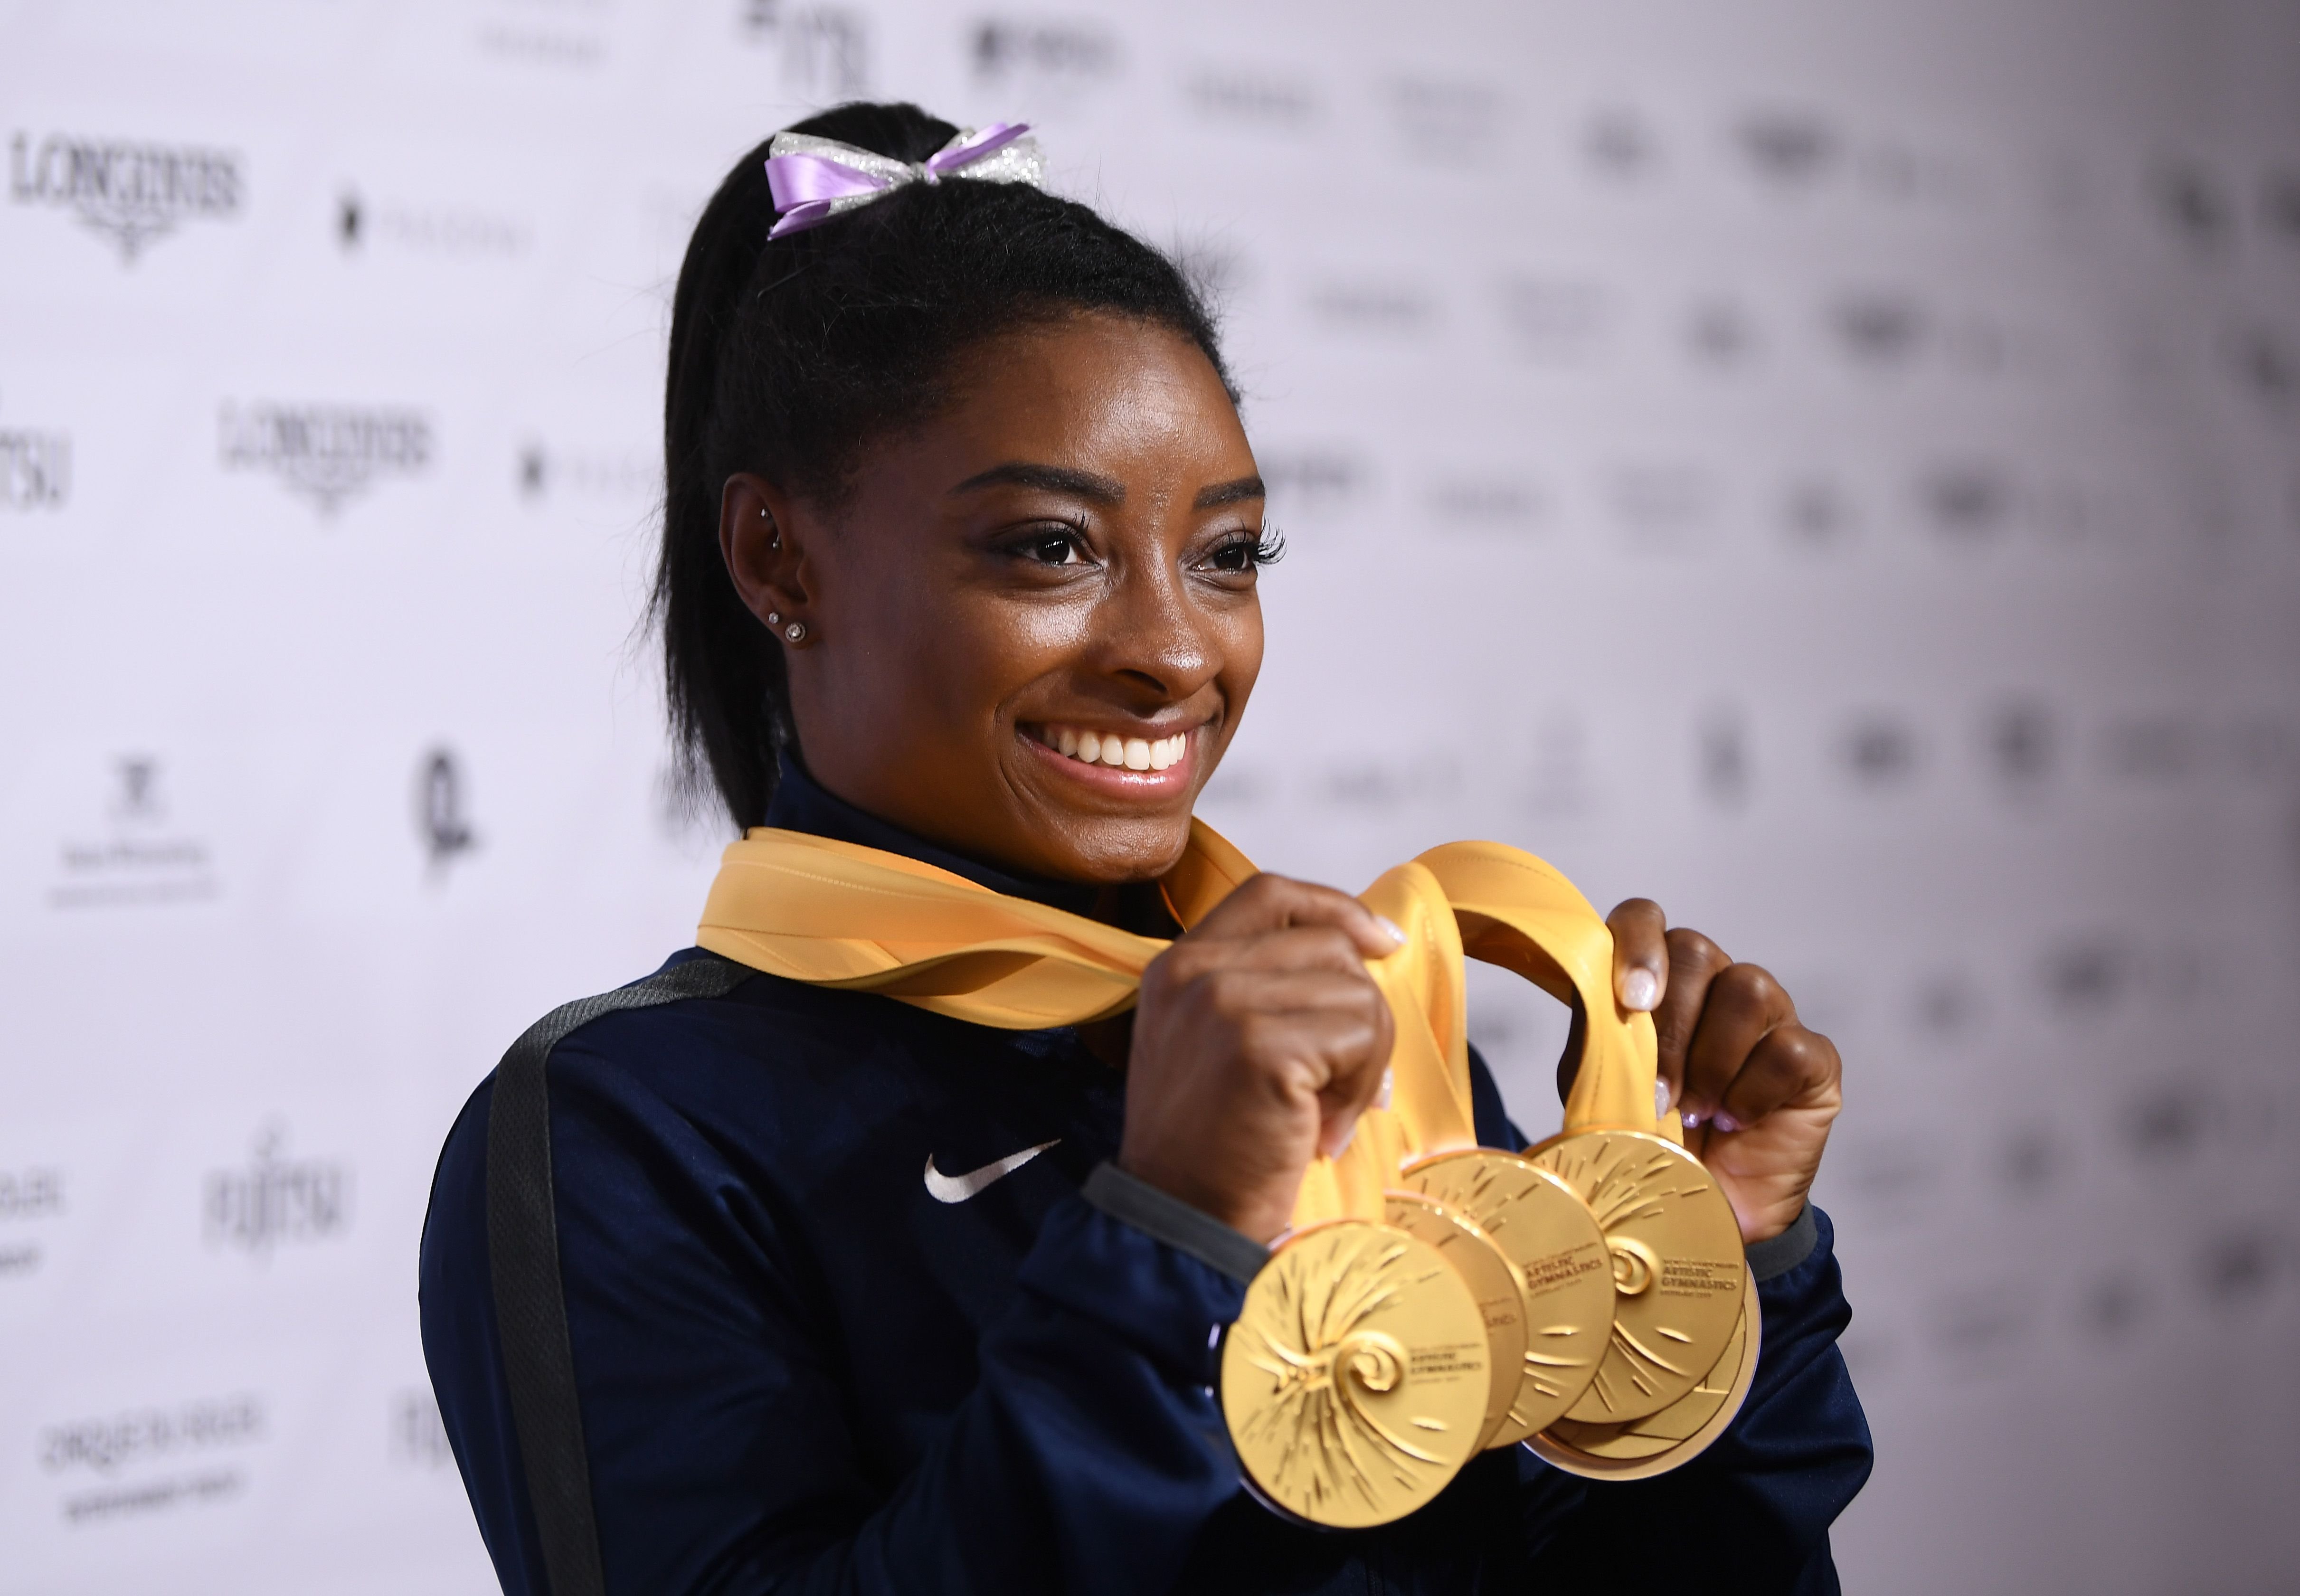 Simone Biles holding up her medals at the FIG Artistic Gymnastics World Championships on October 13, 2019 in Germany. | Photo: Getty Images